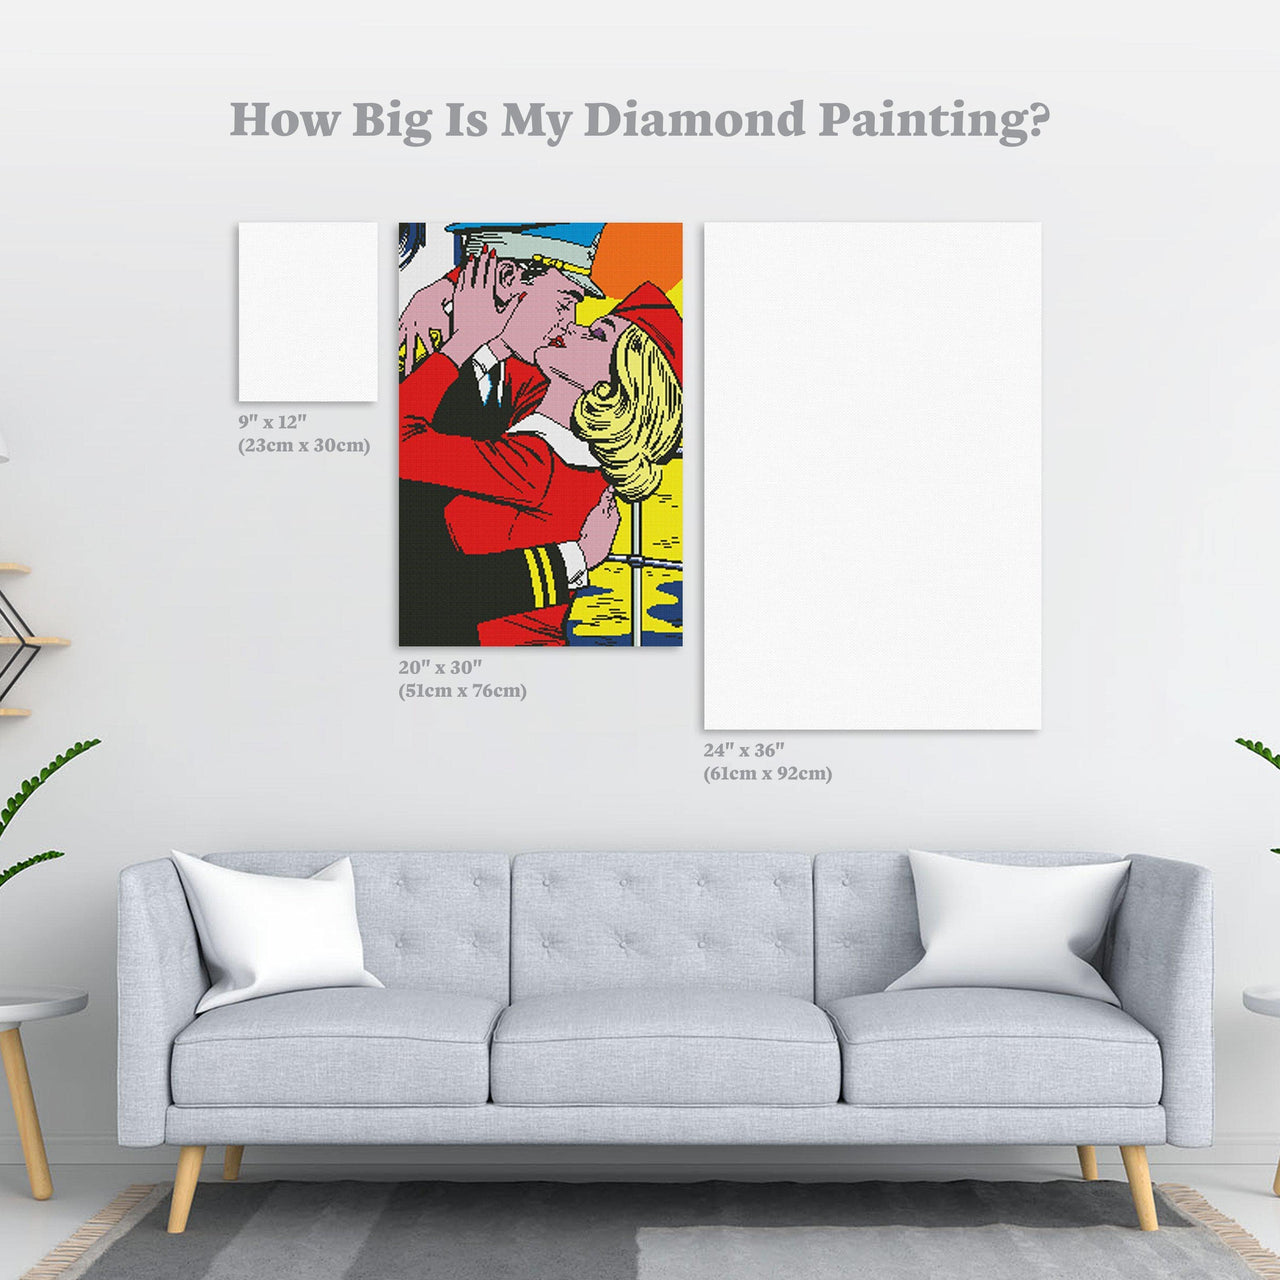 Diamond Painting The Captain 20" x 30″ (51cm x 76cm) / Round with 12 Colors including 2 ABs / 49,051